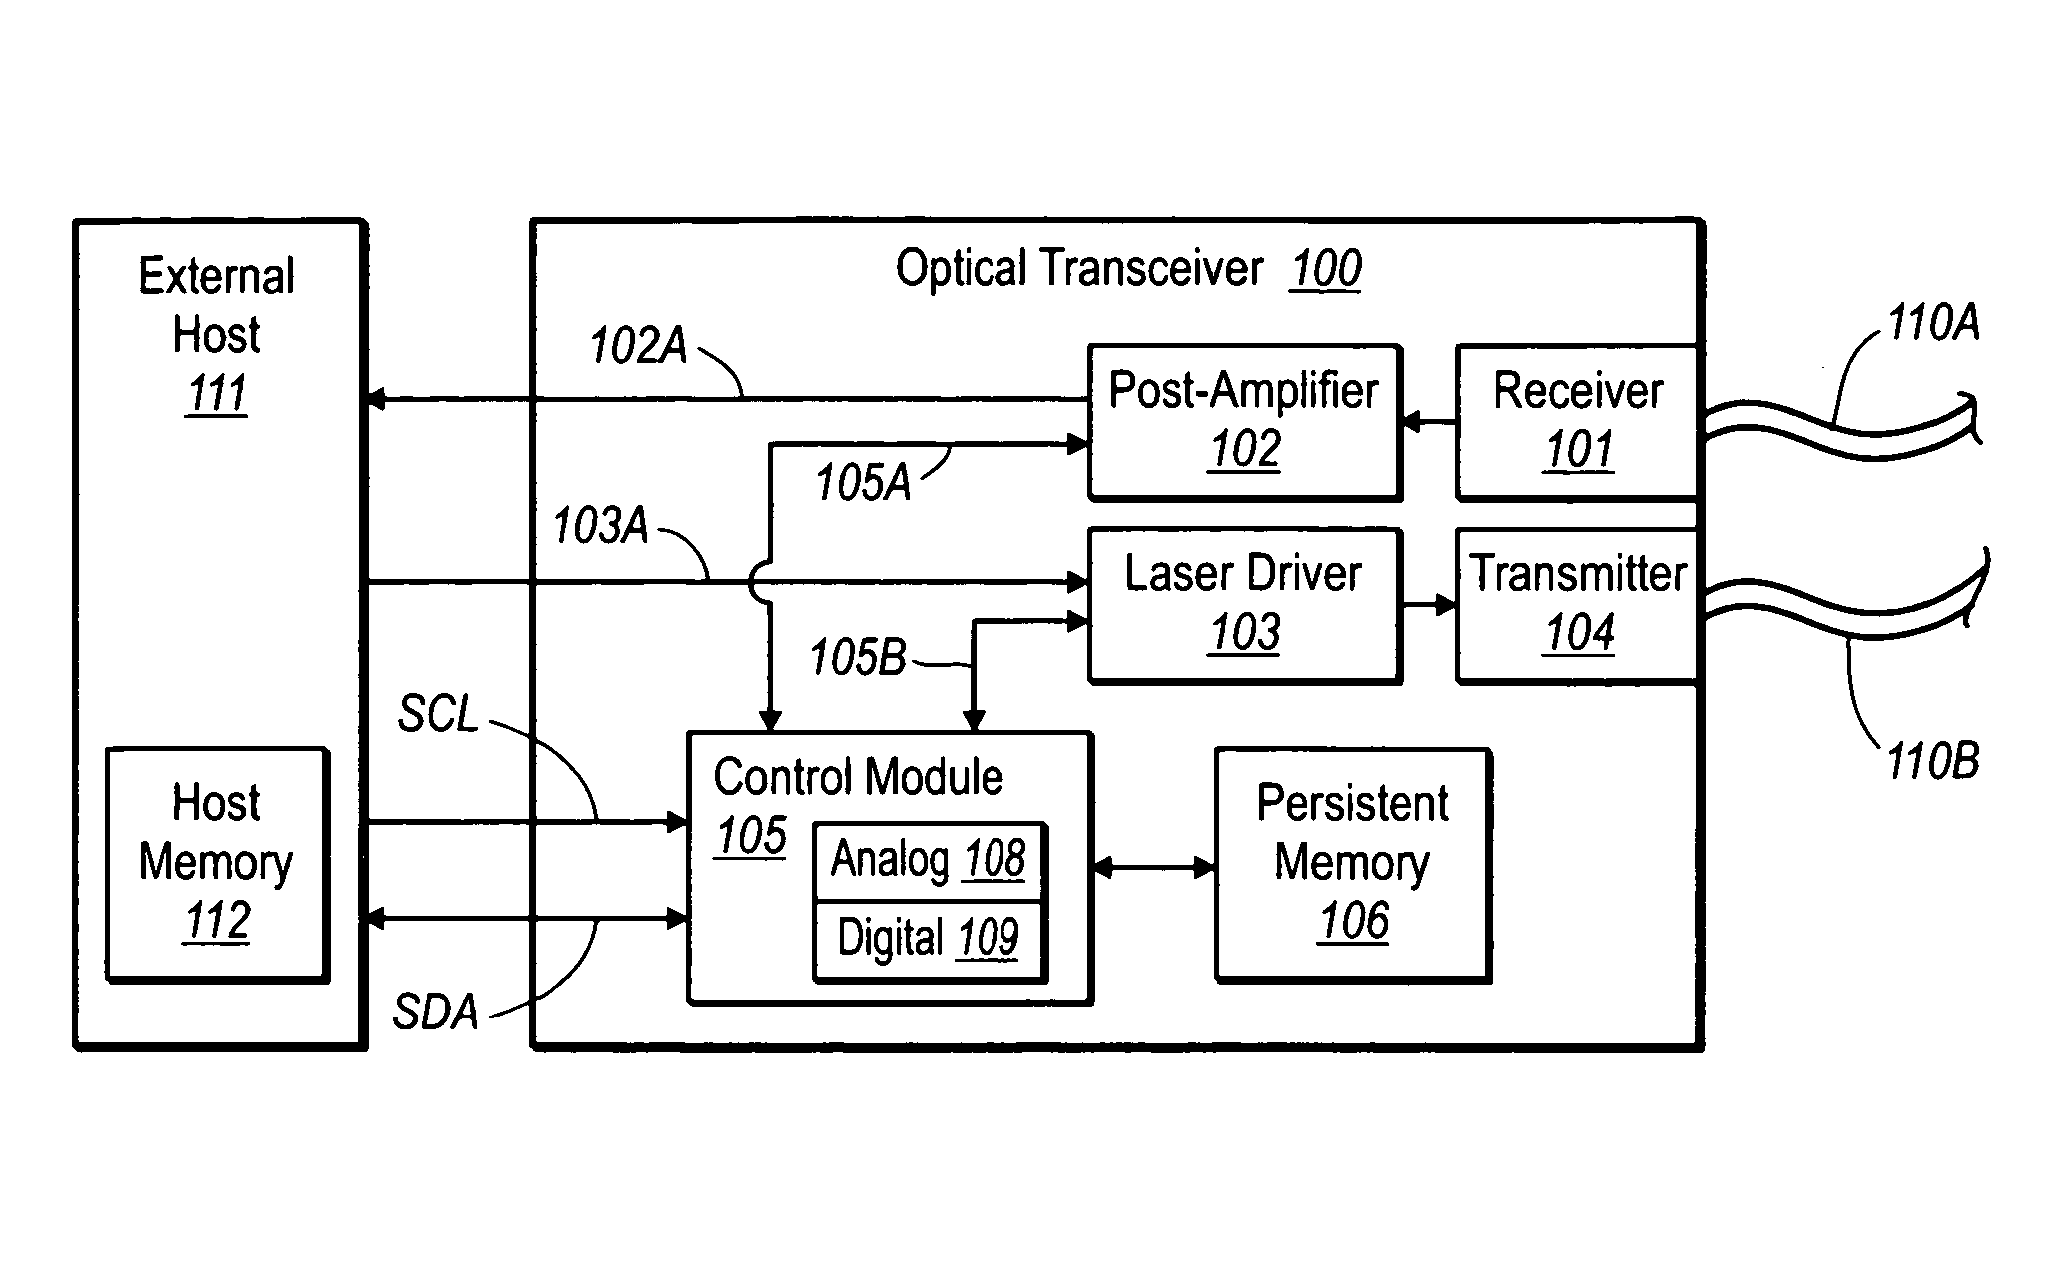 Filtering digital diagnostics information in an optical transceiver prior to reporting to host